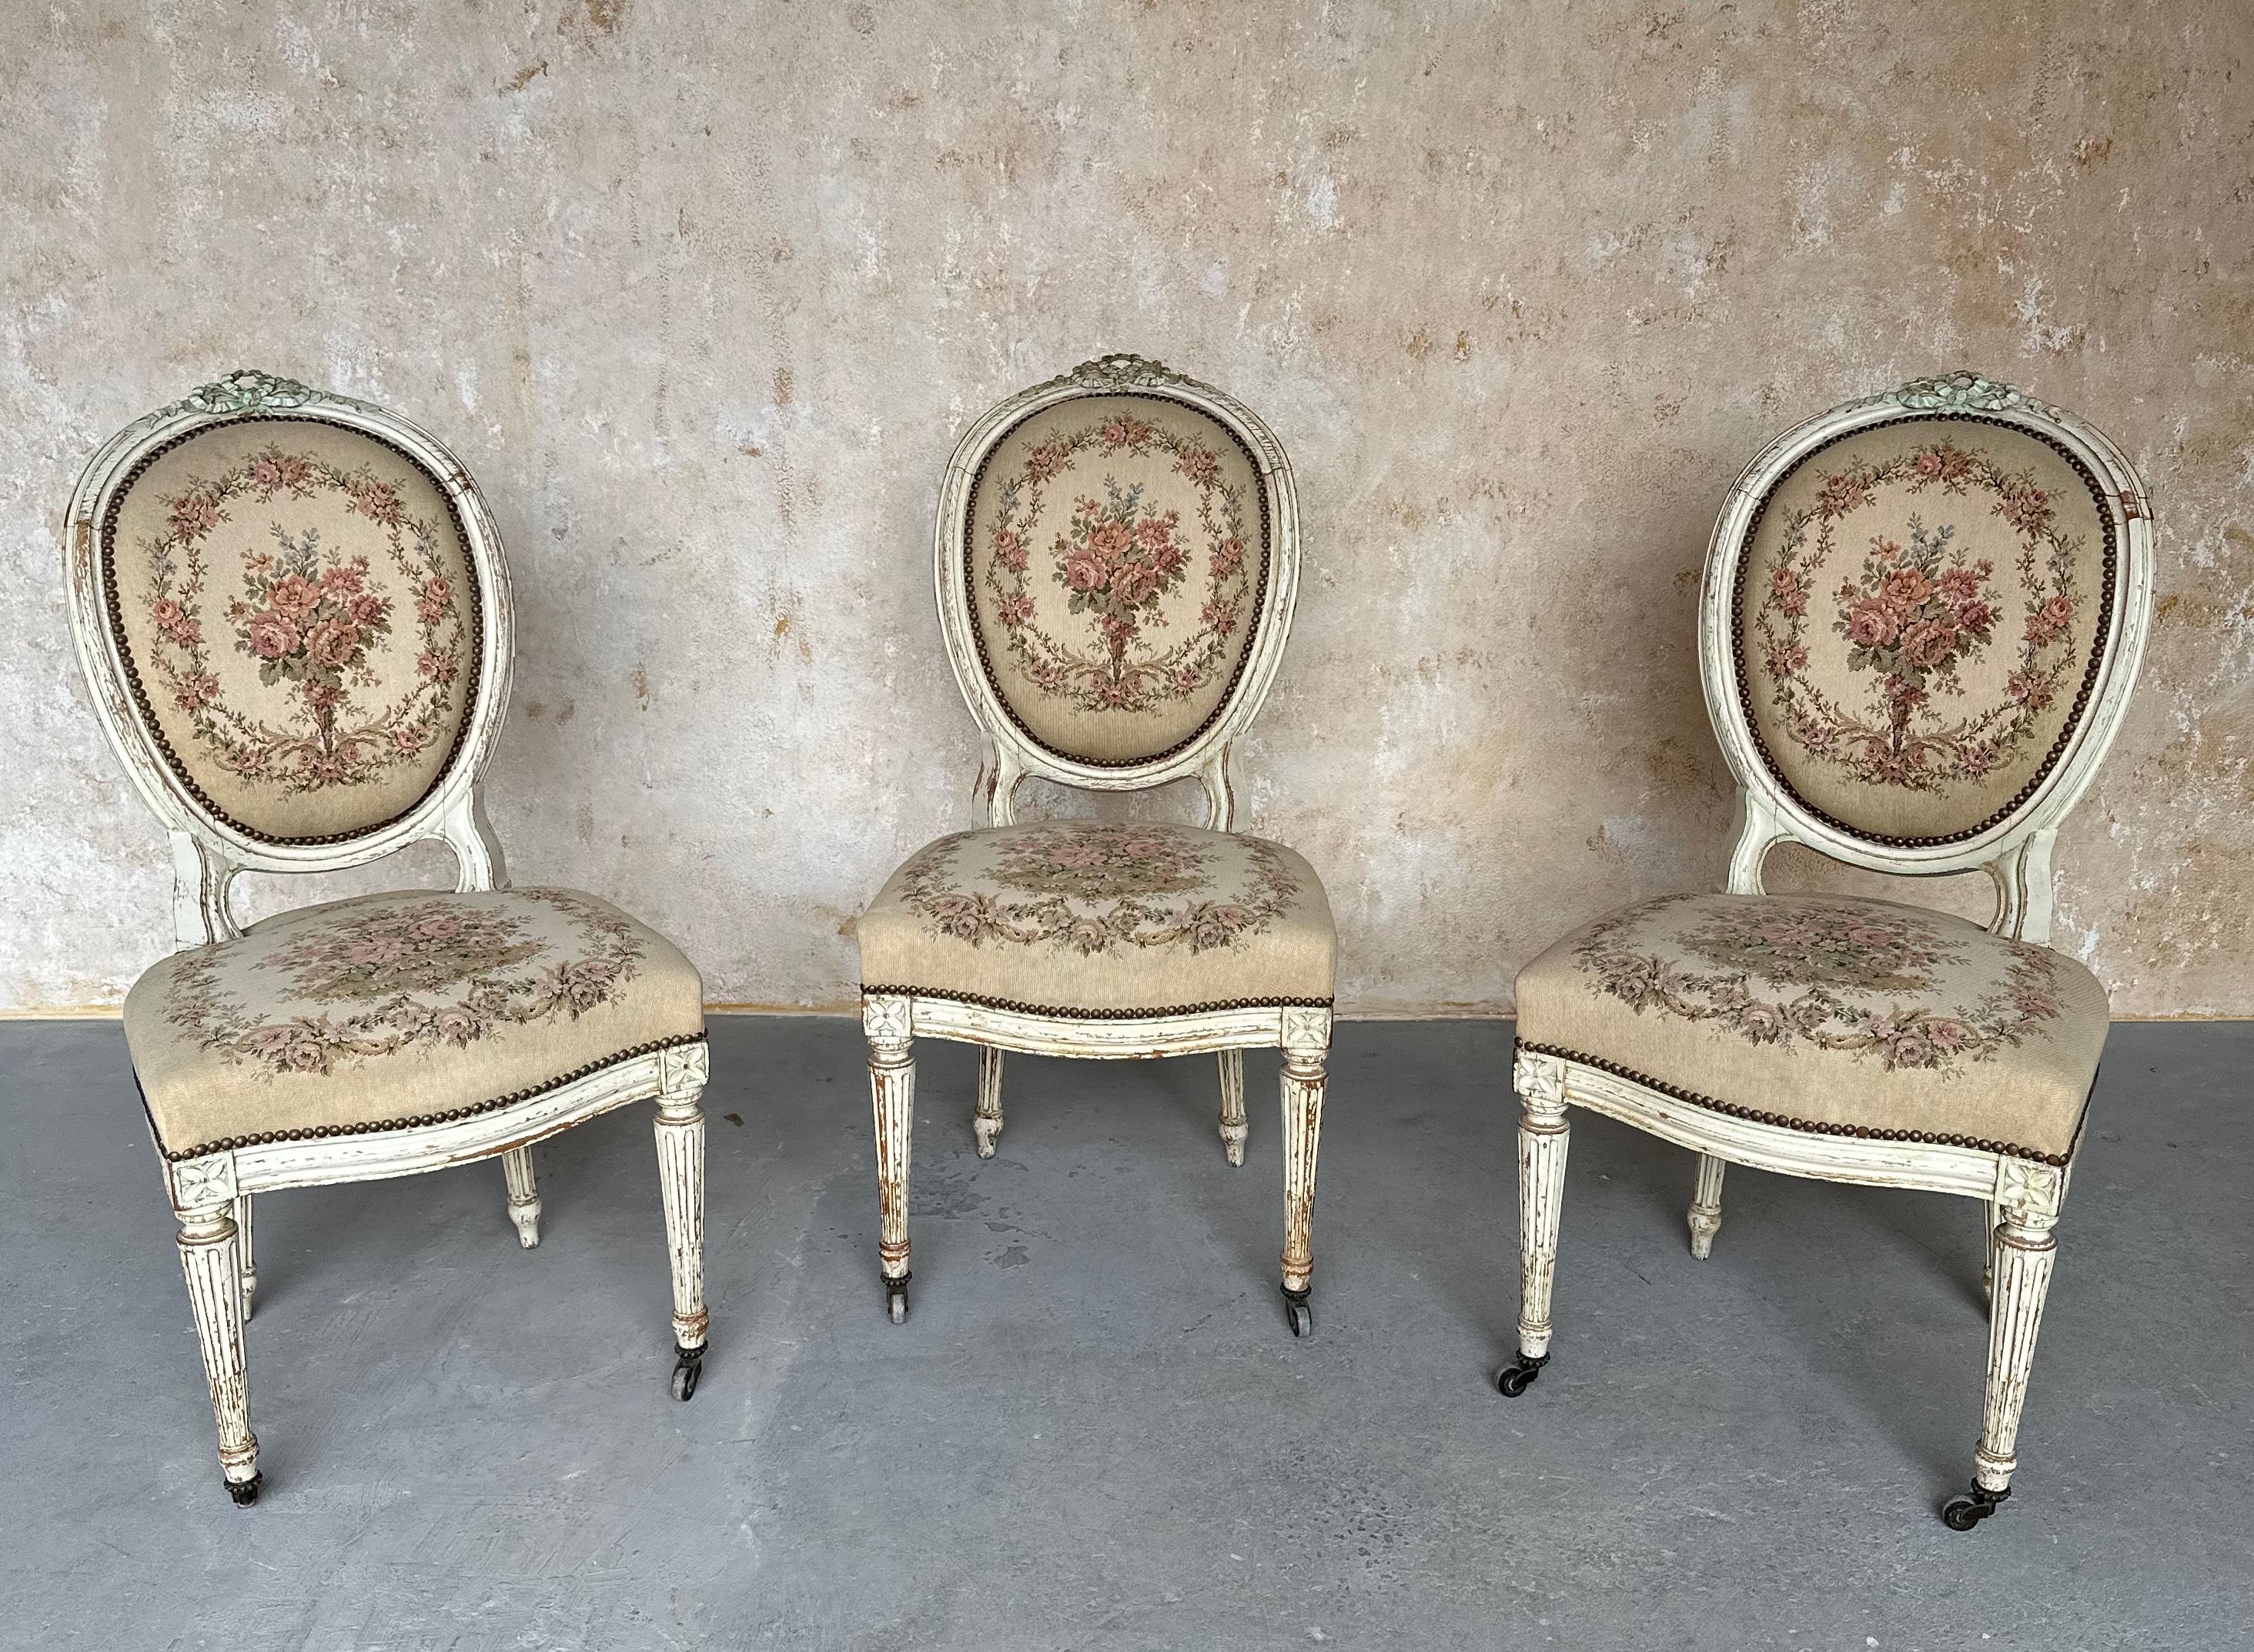 This beautiful set of three French 19th century Louis XVI style side chairs features petit point upholstery. The original patinated, finished frames have beautifully carved decorations and fluted legs and the fabric, a petit point floral design, is